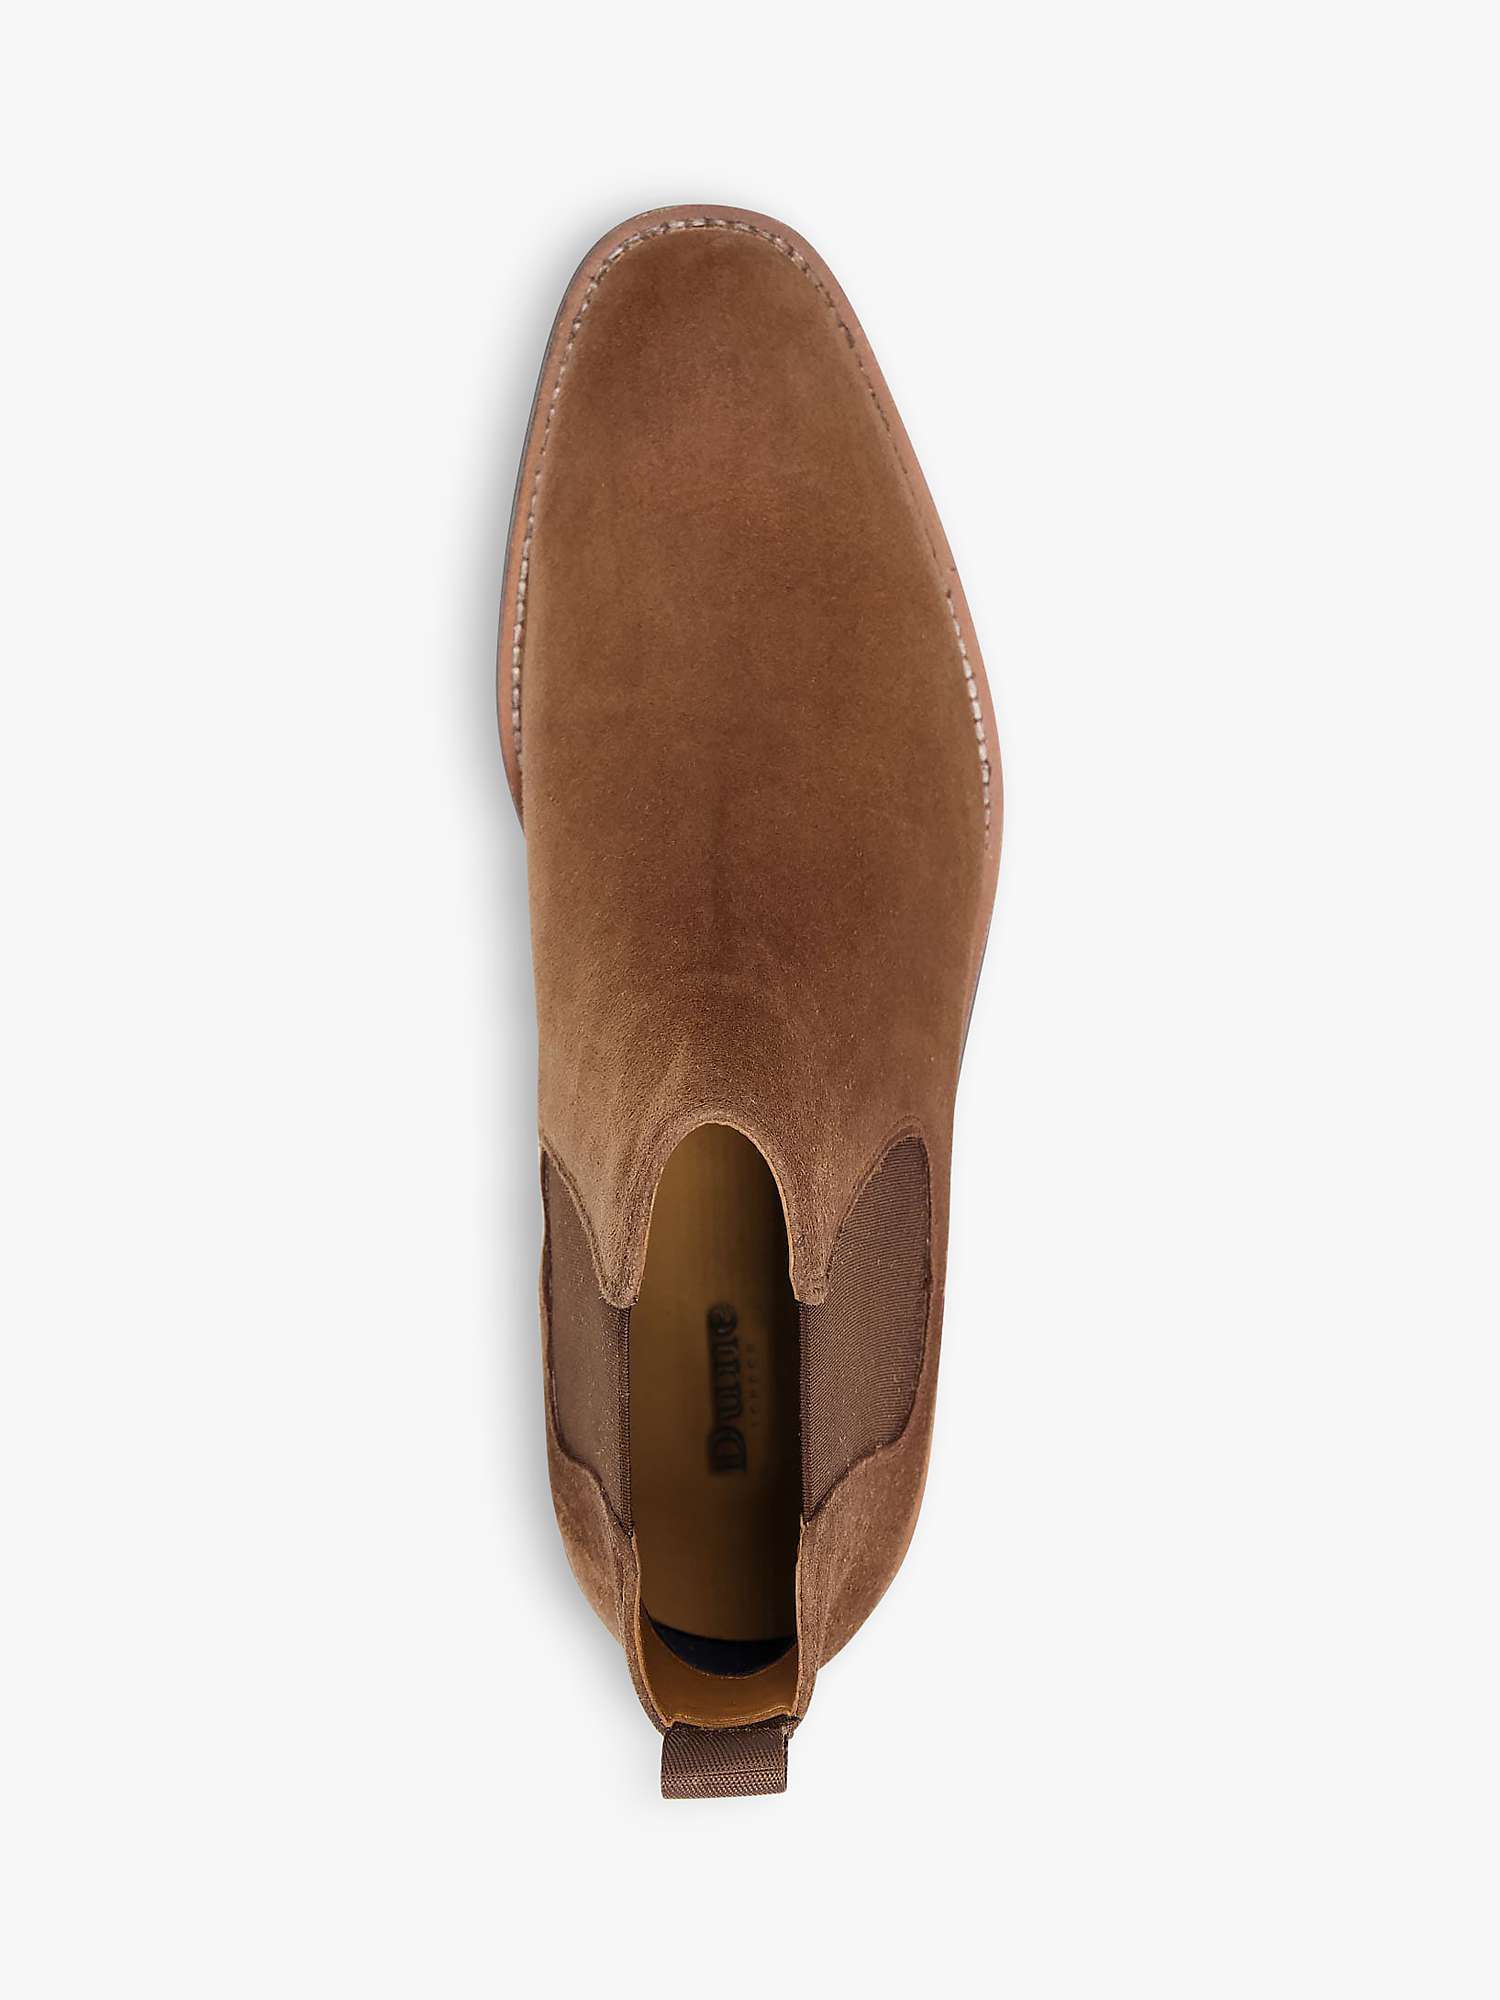 Buy Dune Masons Suede Chelsea Boots Online at johnlewis.com